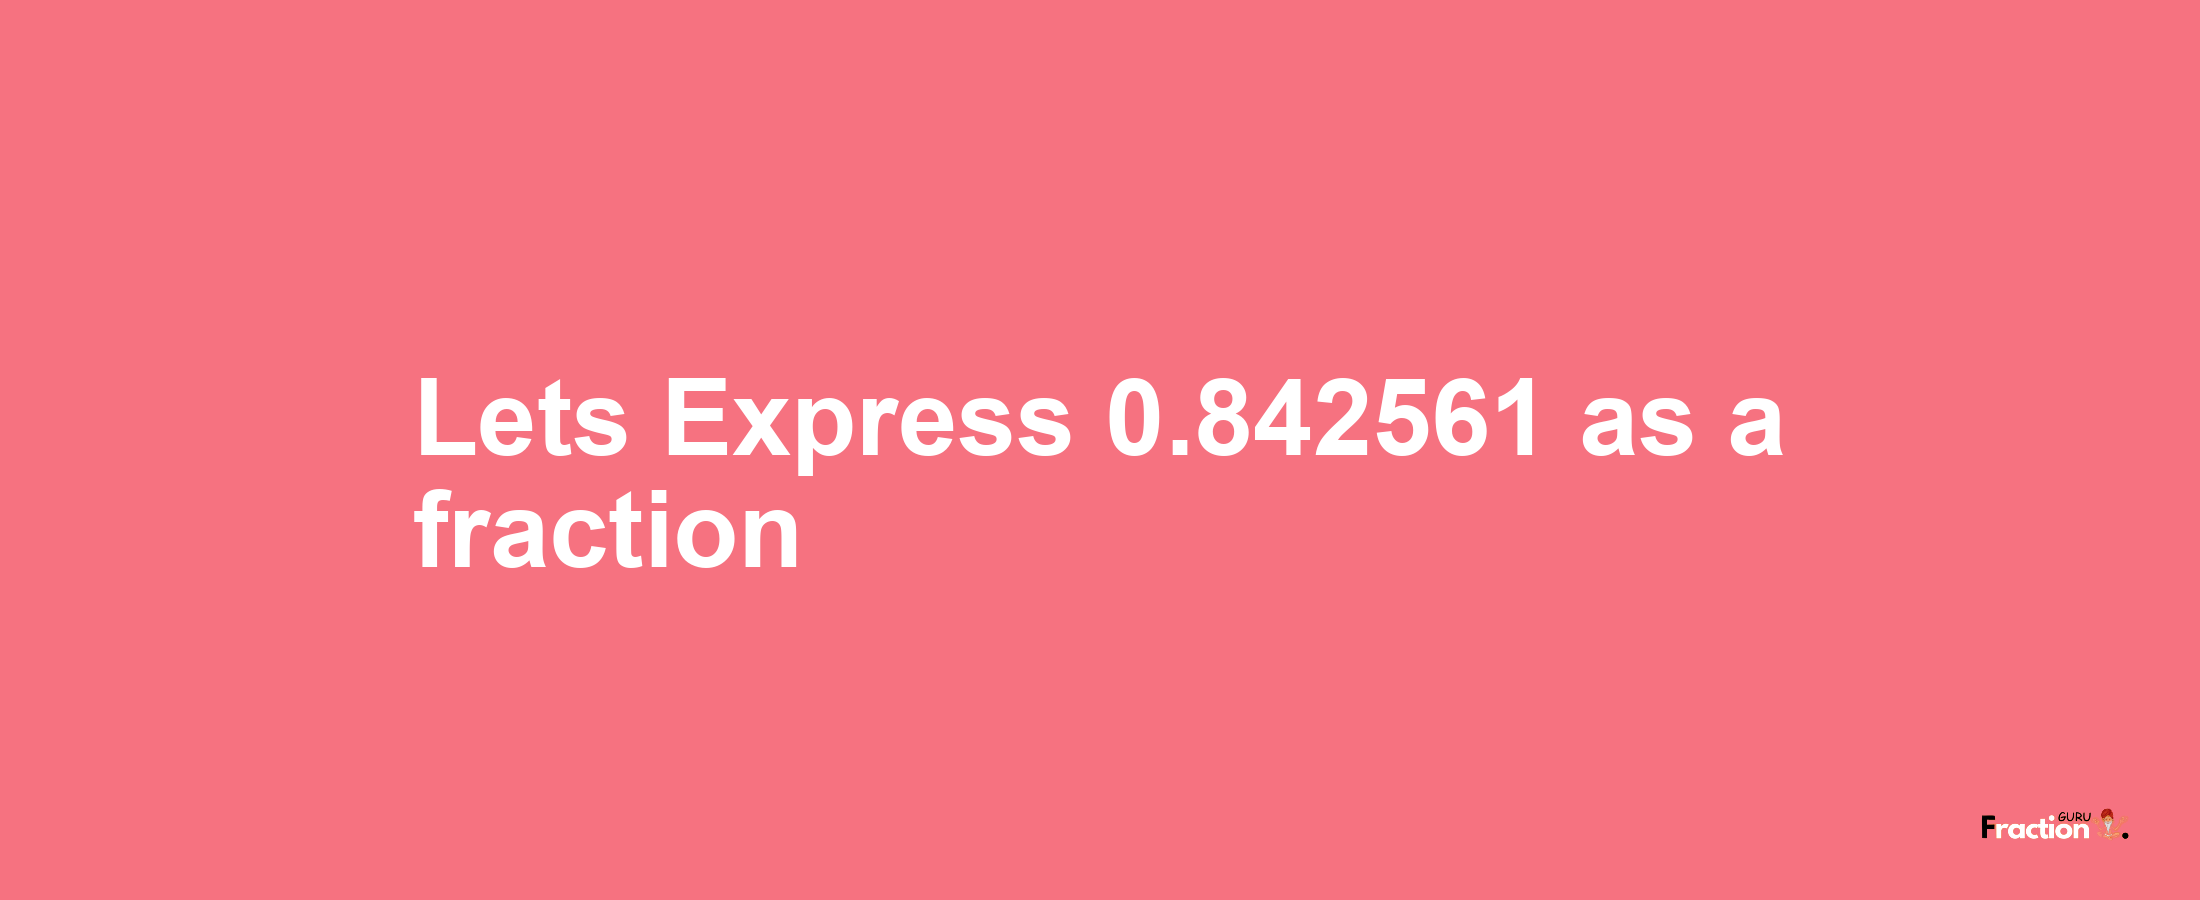 Lets Express 0.842561 as afraction